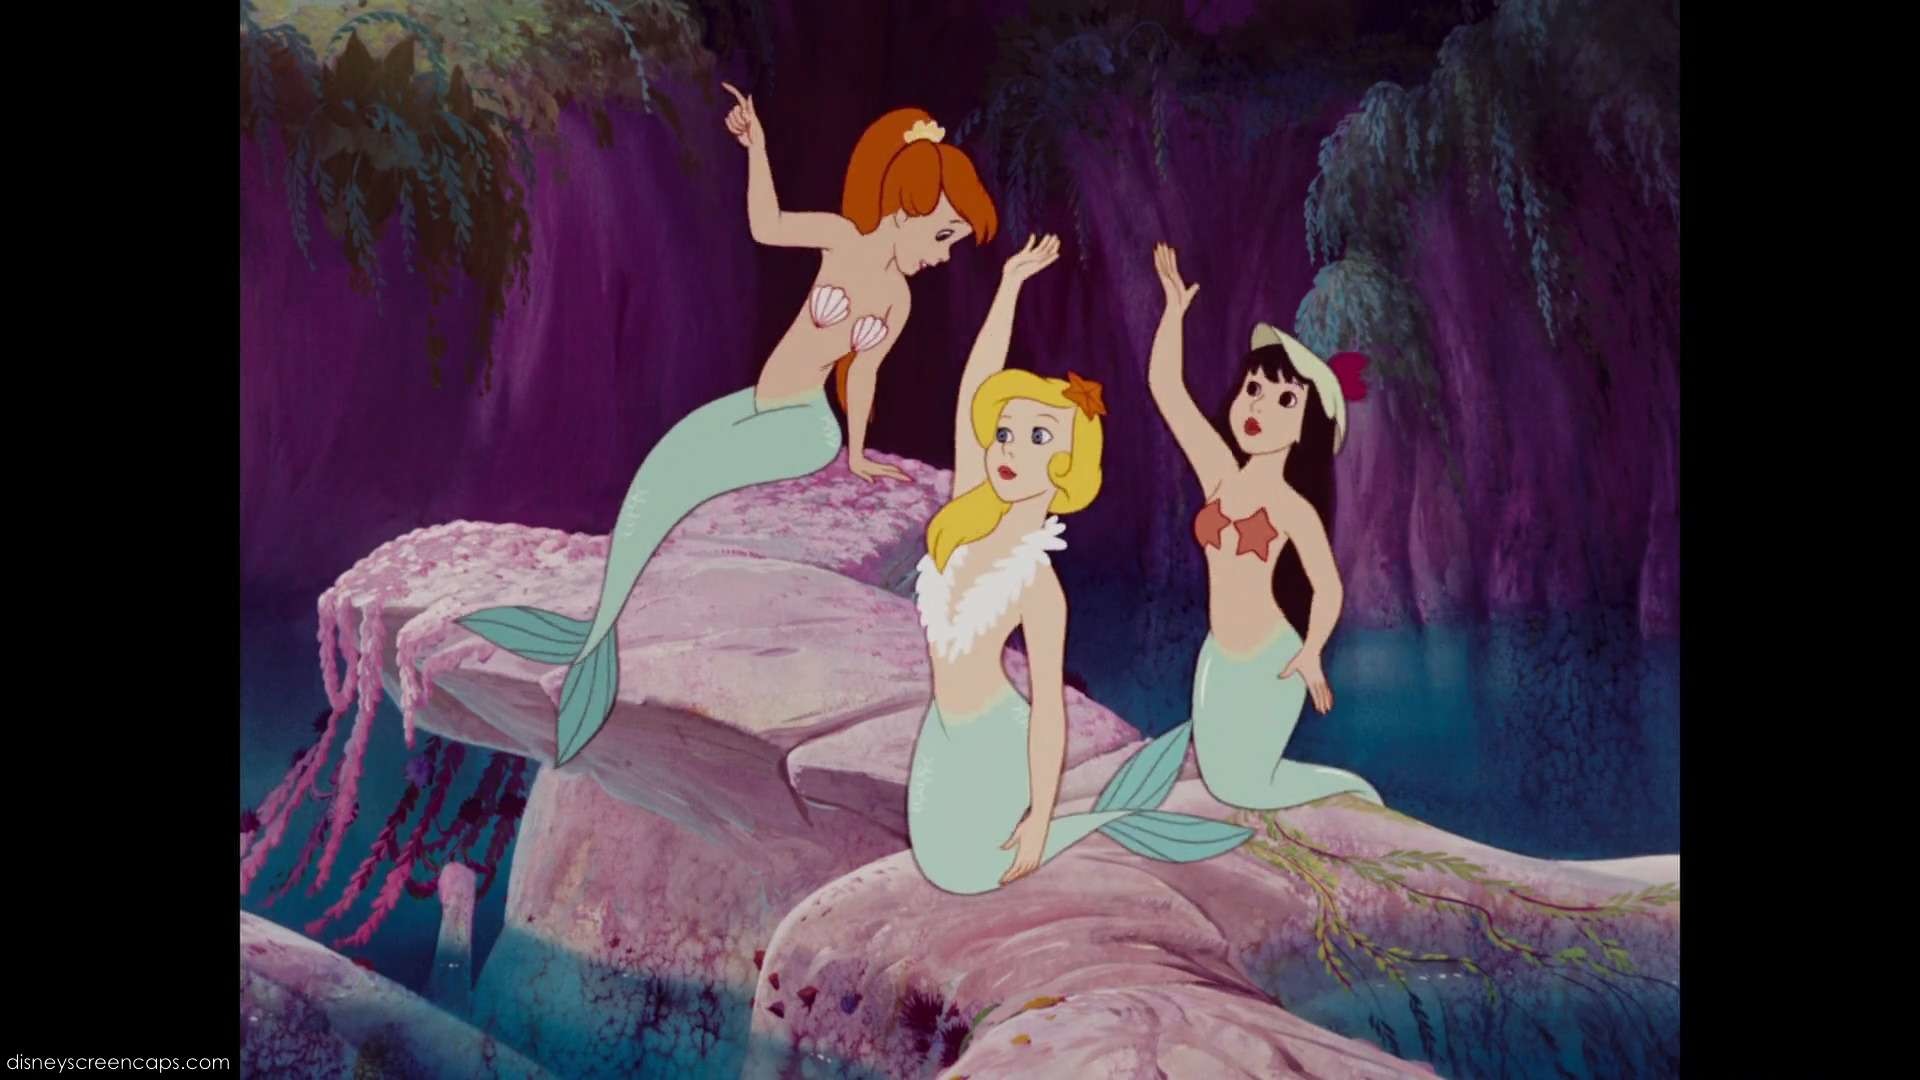 Peter Pan Mermaids images Peter's Girls HD wallpaper and background photos